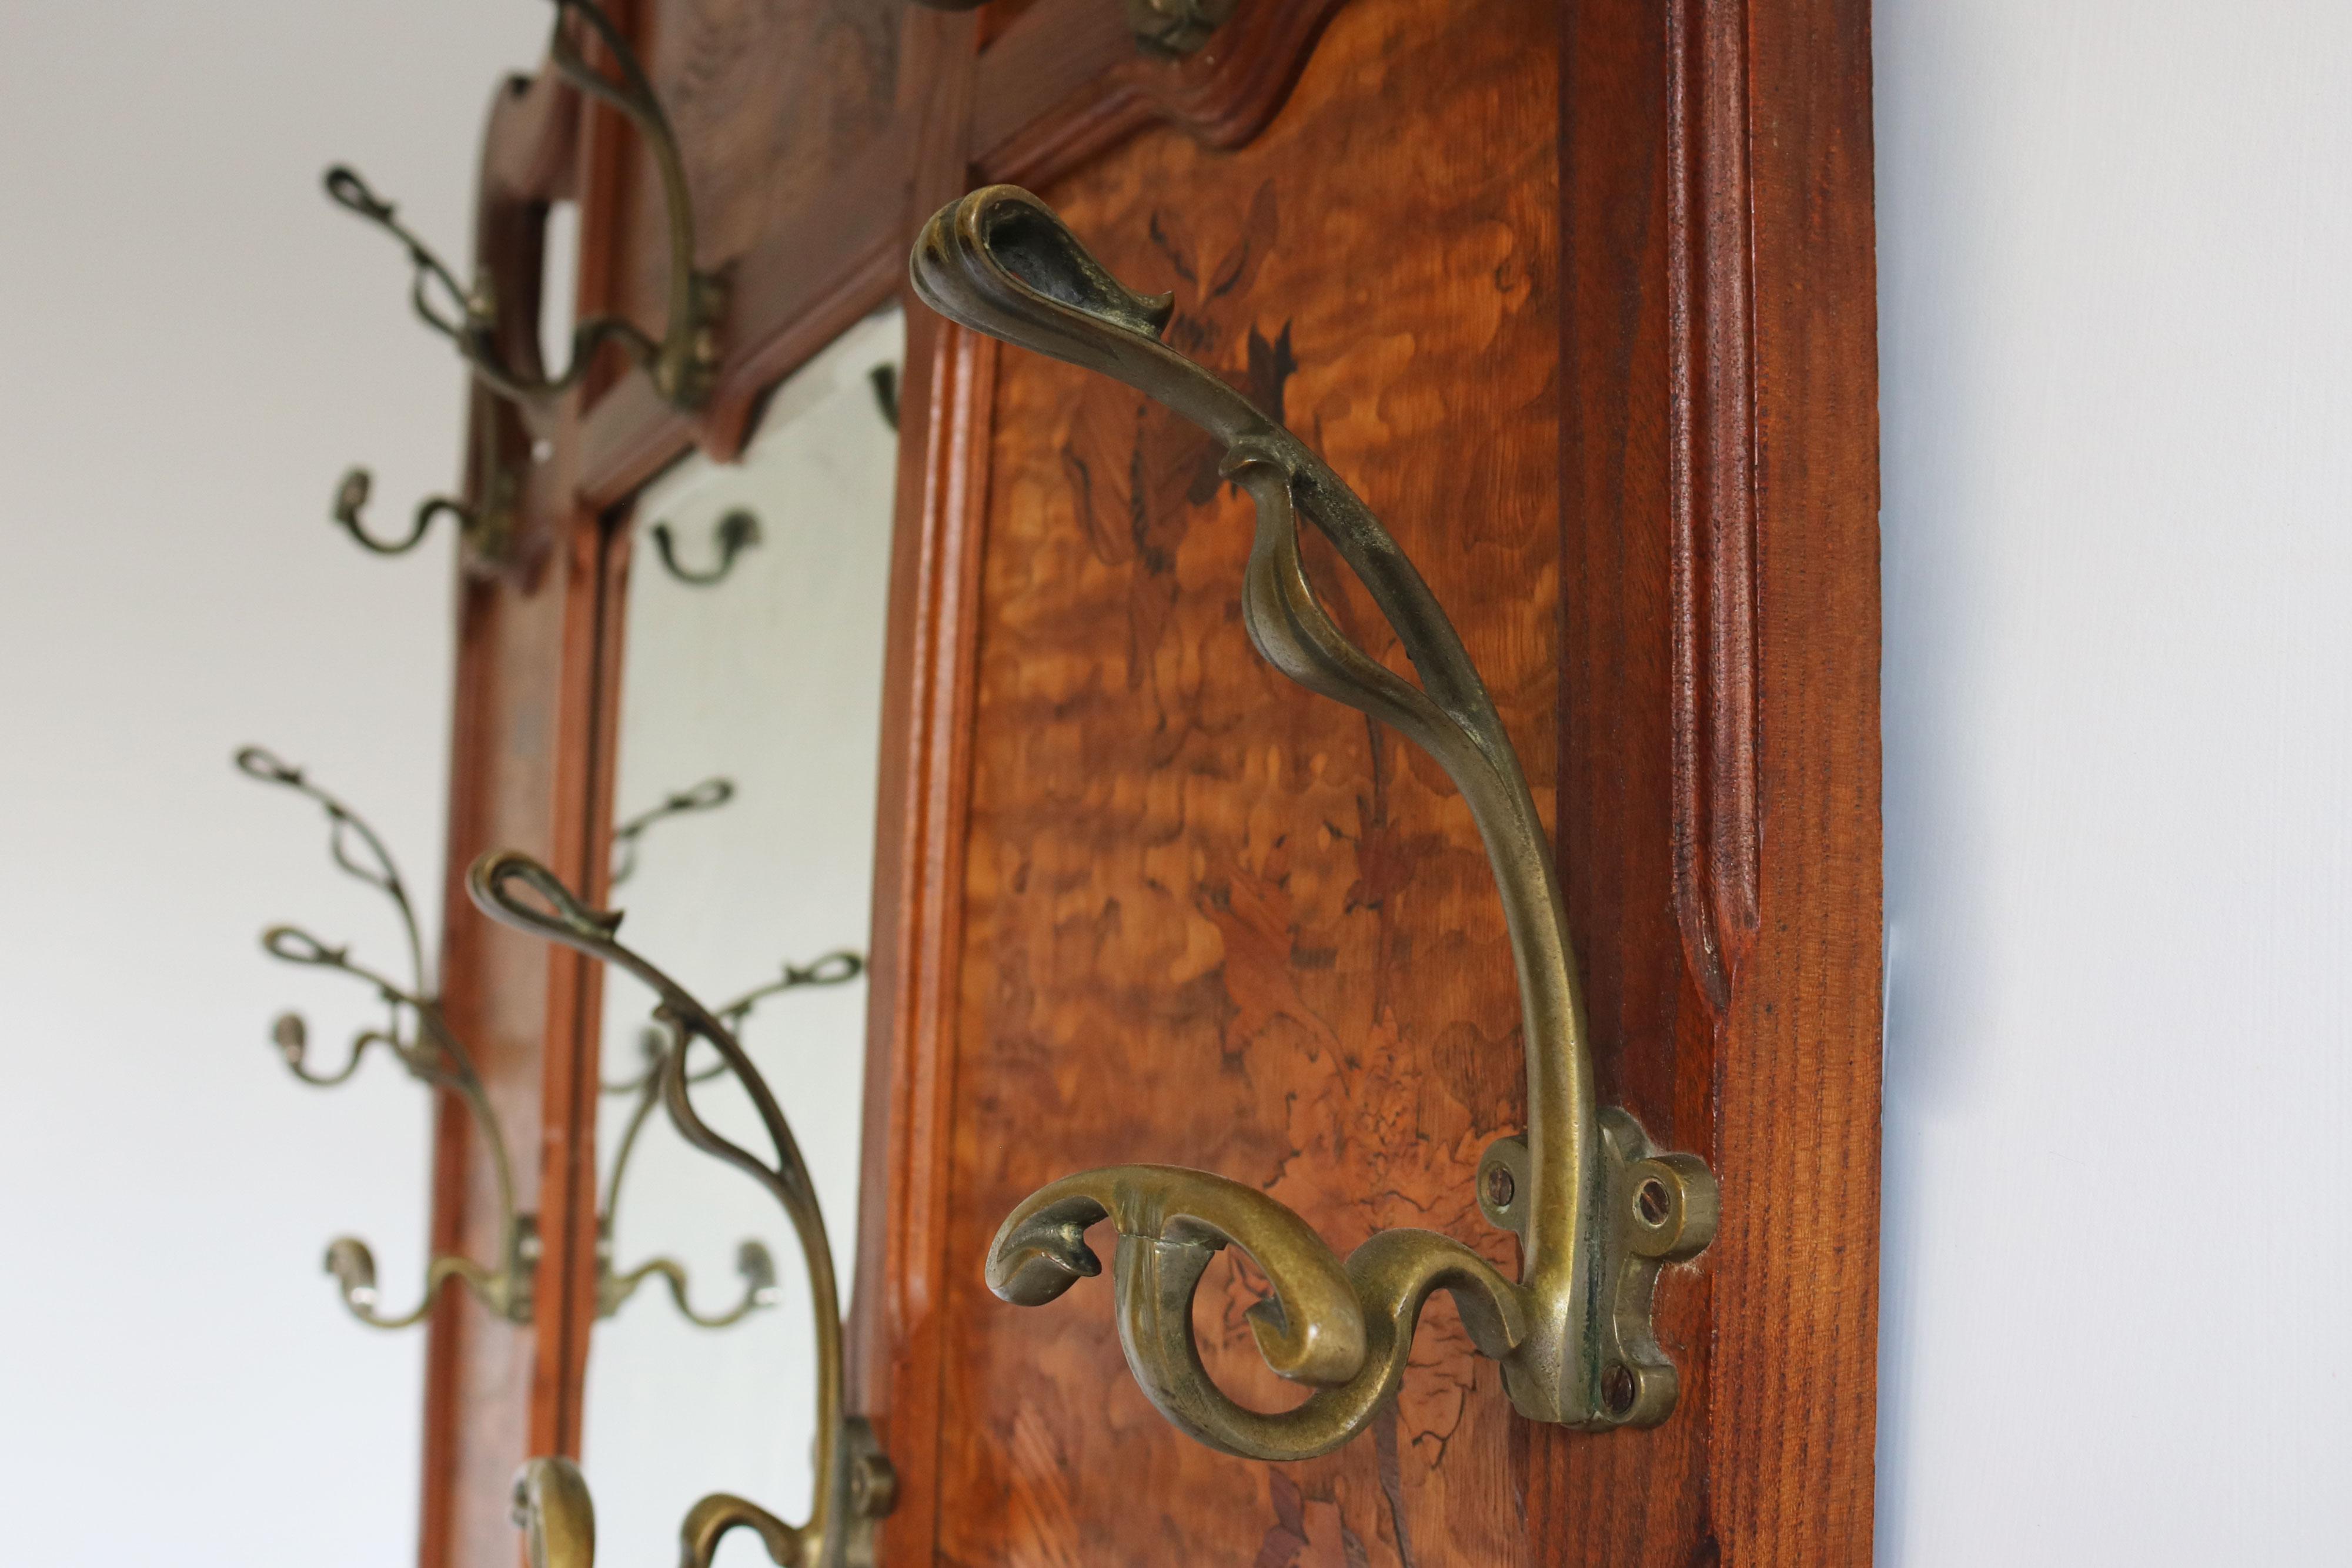 Walnut French Art nouveau hall tree / coat rack by Emile galle 1905 marquetry hallway For Sale